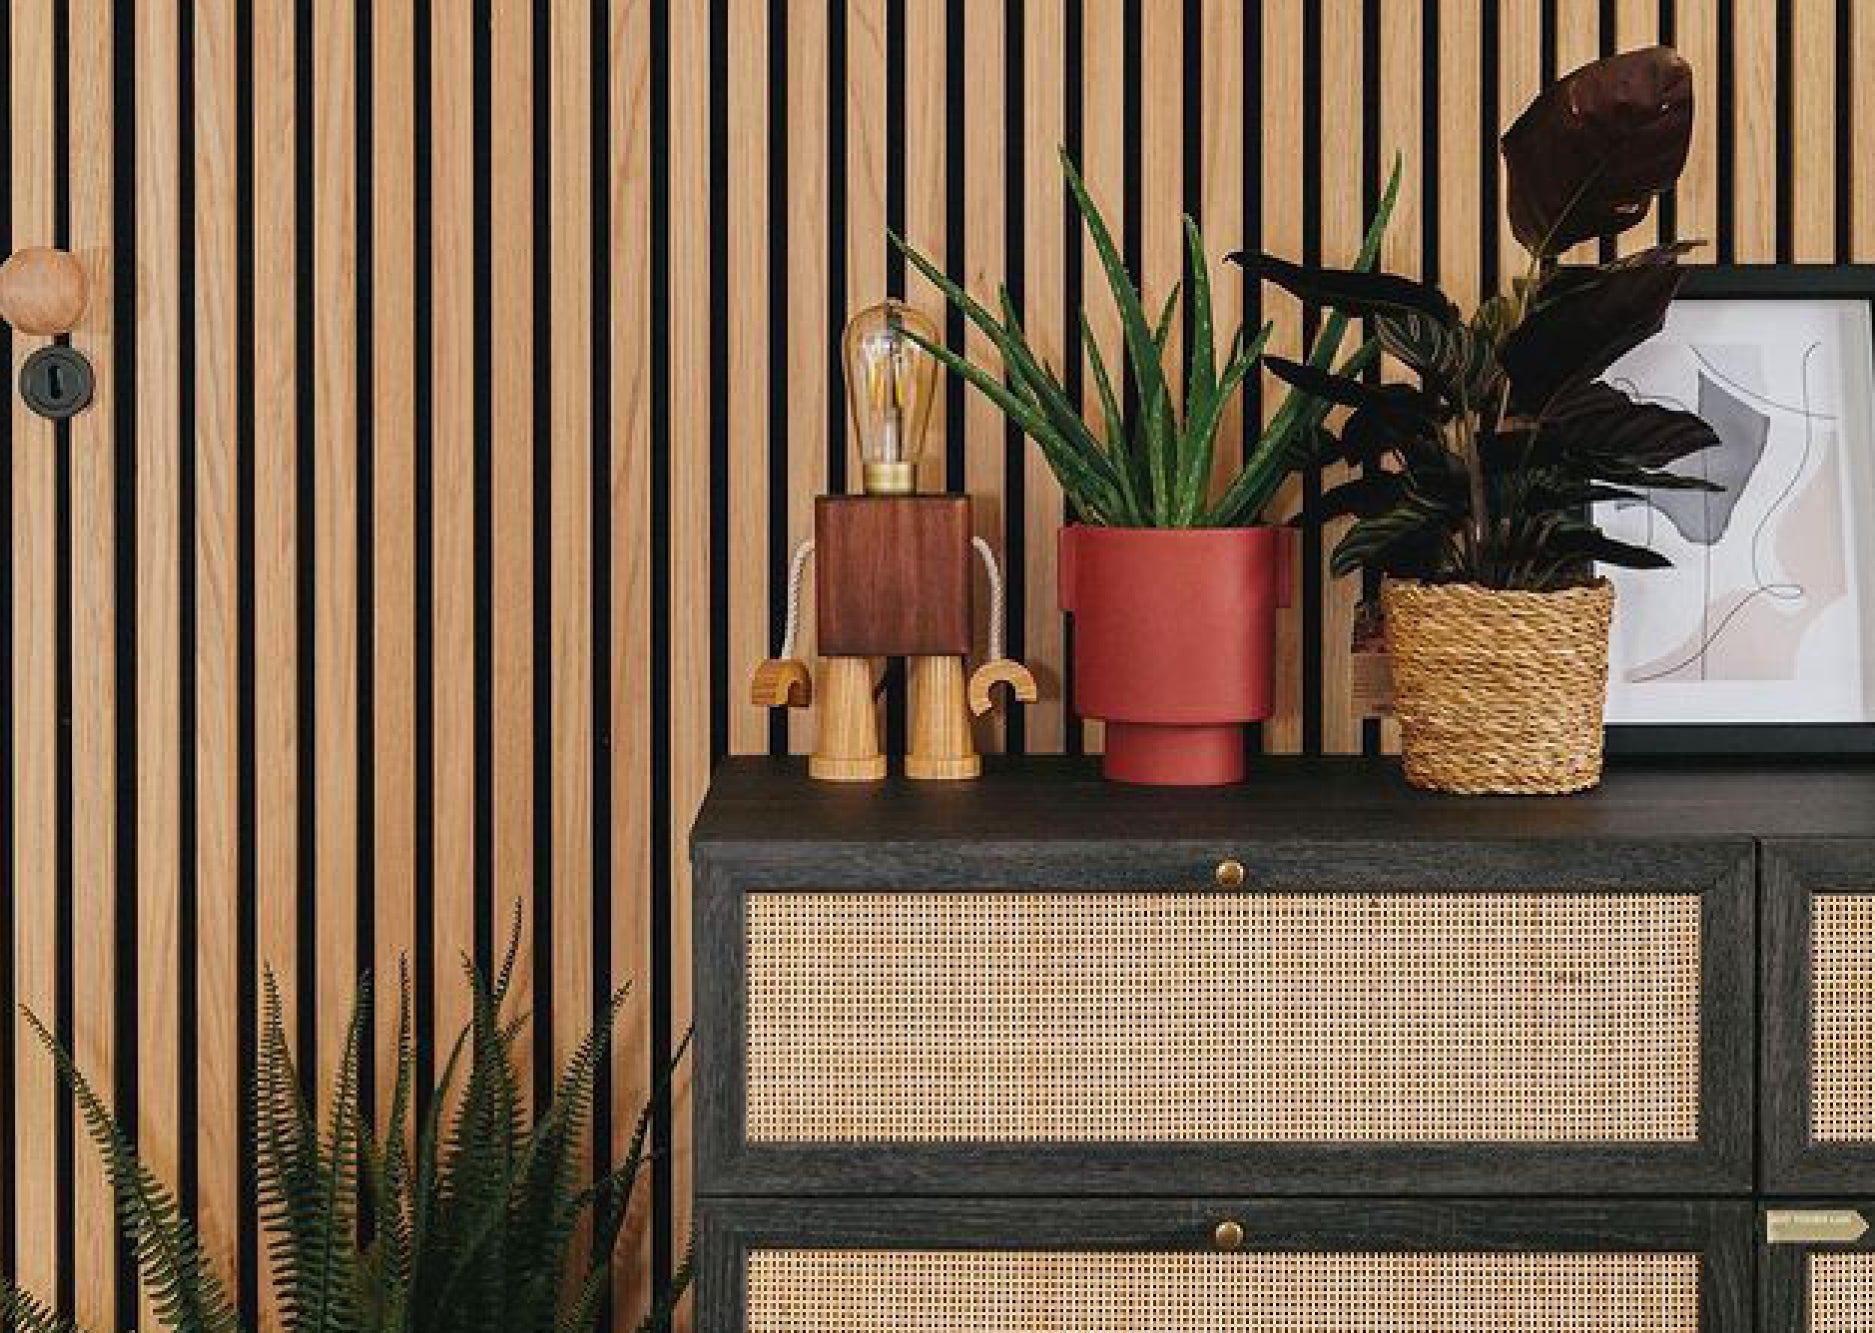 Boho design chest of drawers with plants and wooden lamp on top. Naturewall slatwall panels on the wall behind